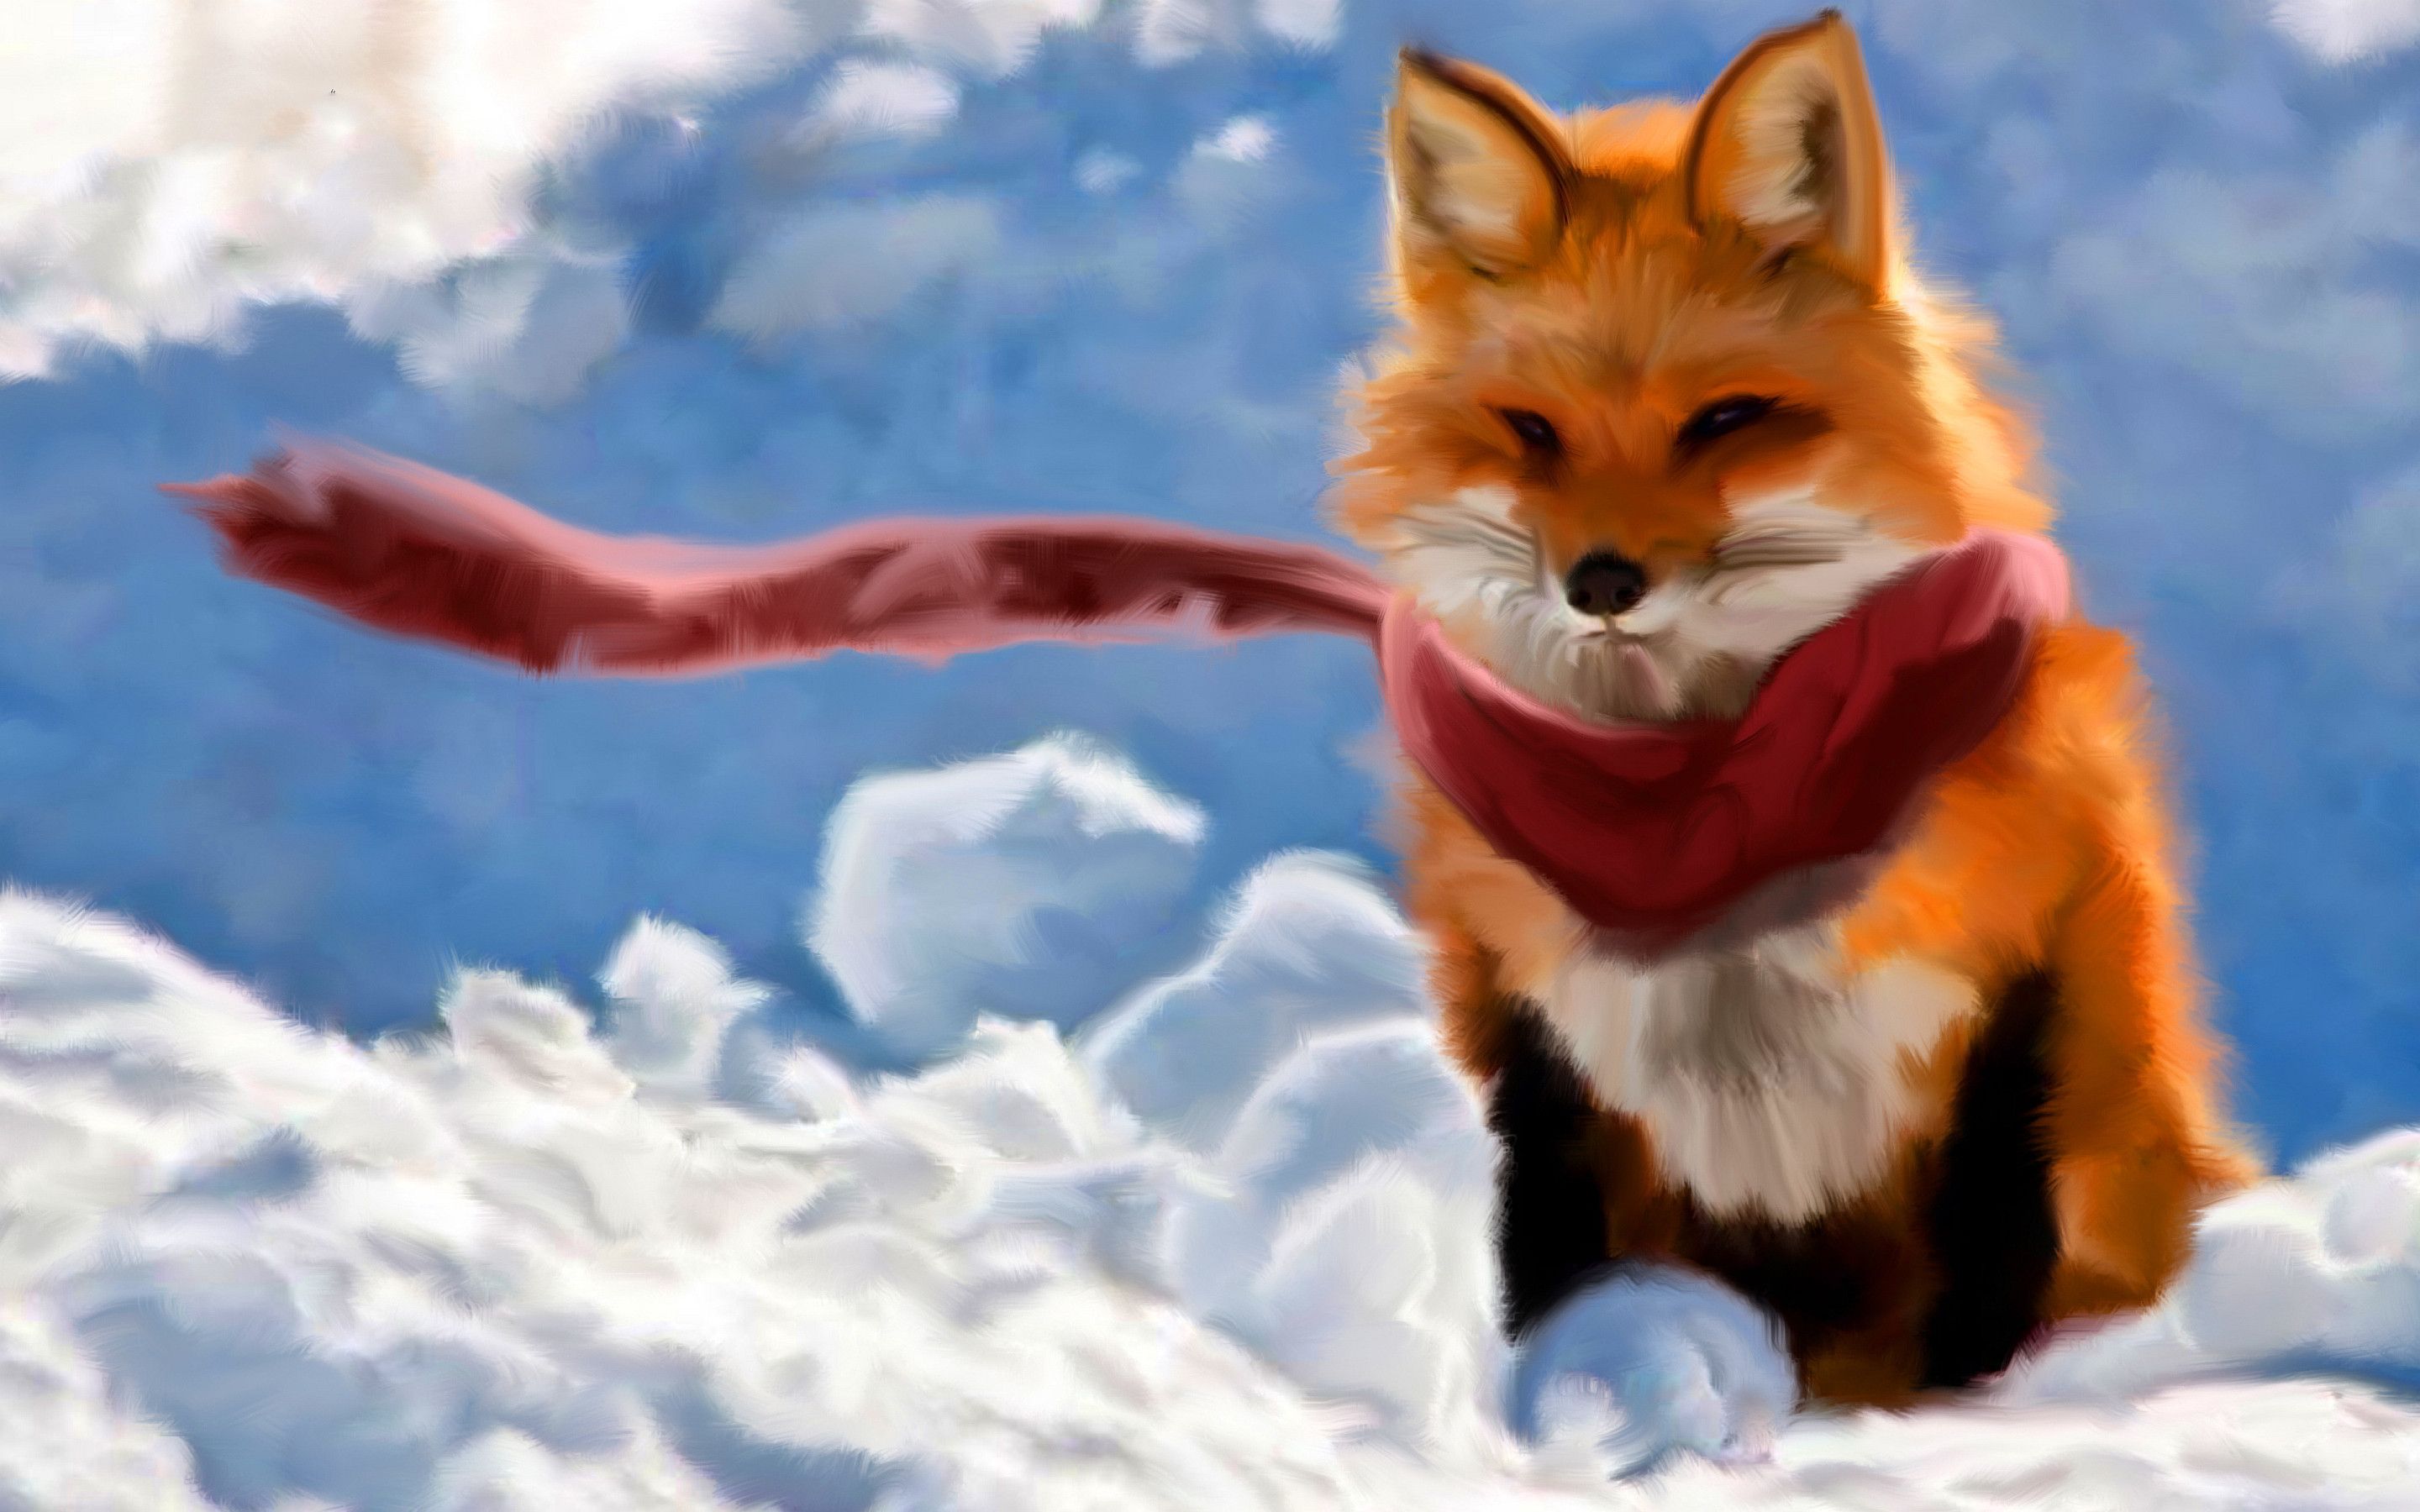 Fox full hd, hdtv, fhd, 1080p wallpapers hd, desktop backgrounds 1920x1080,  images and pictures